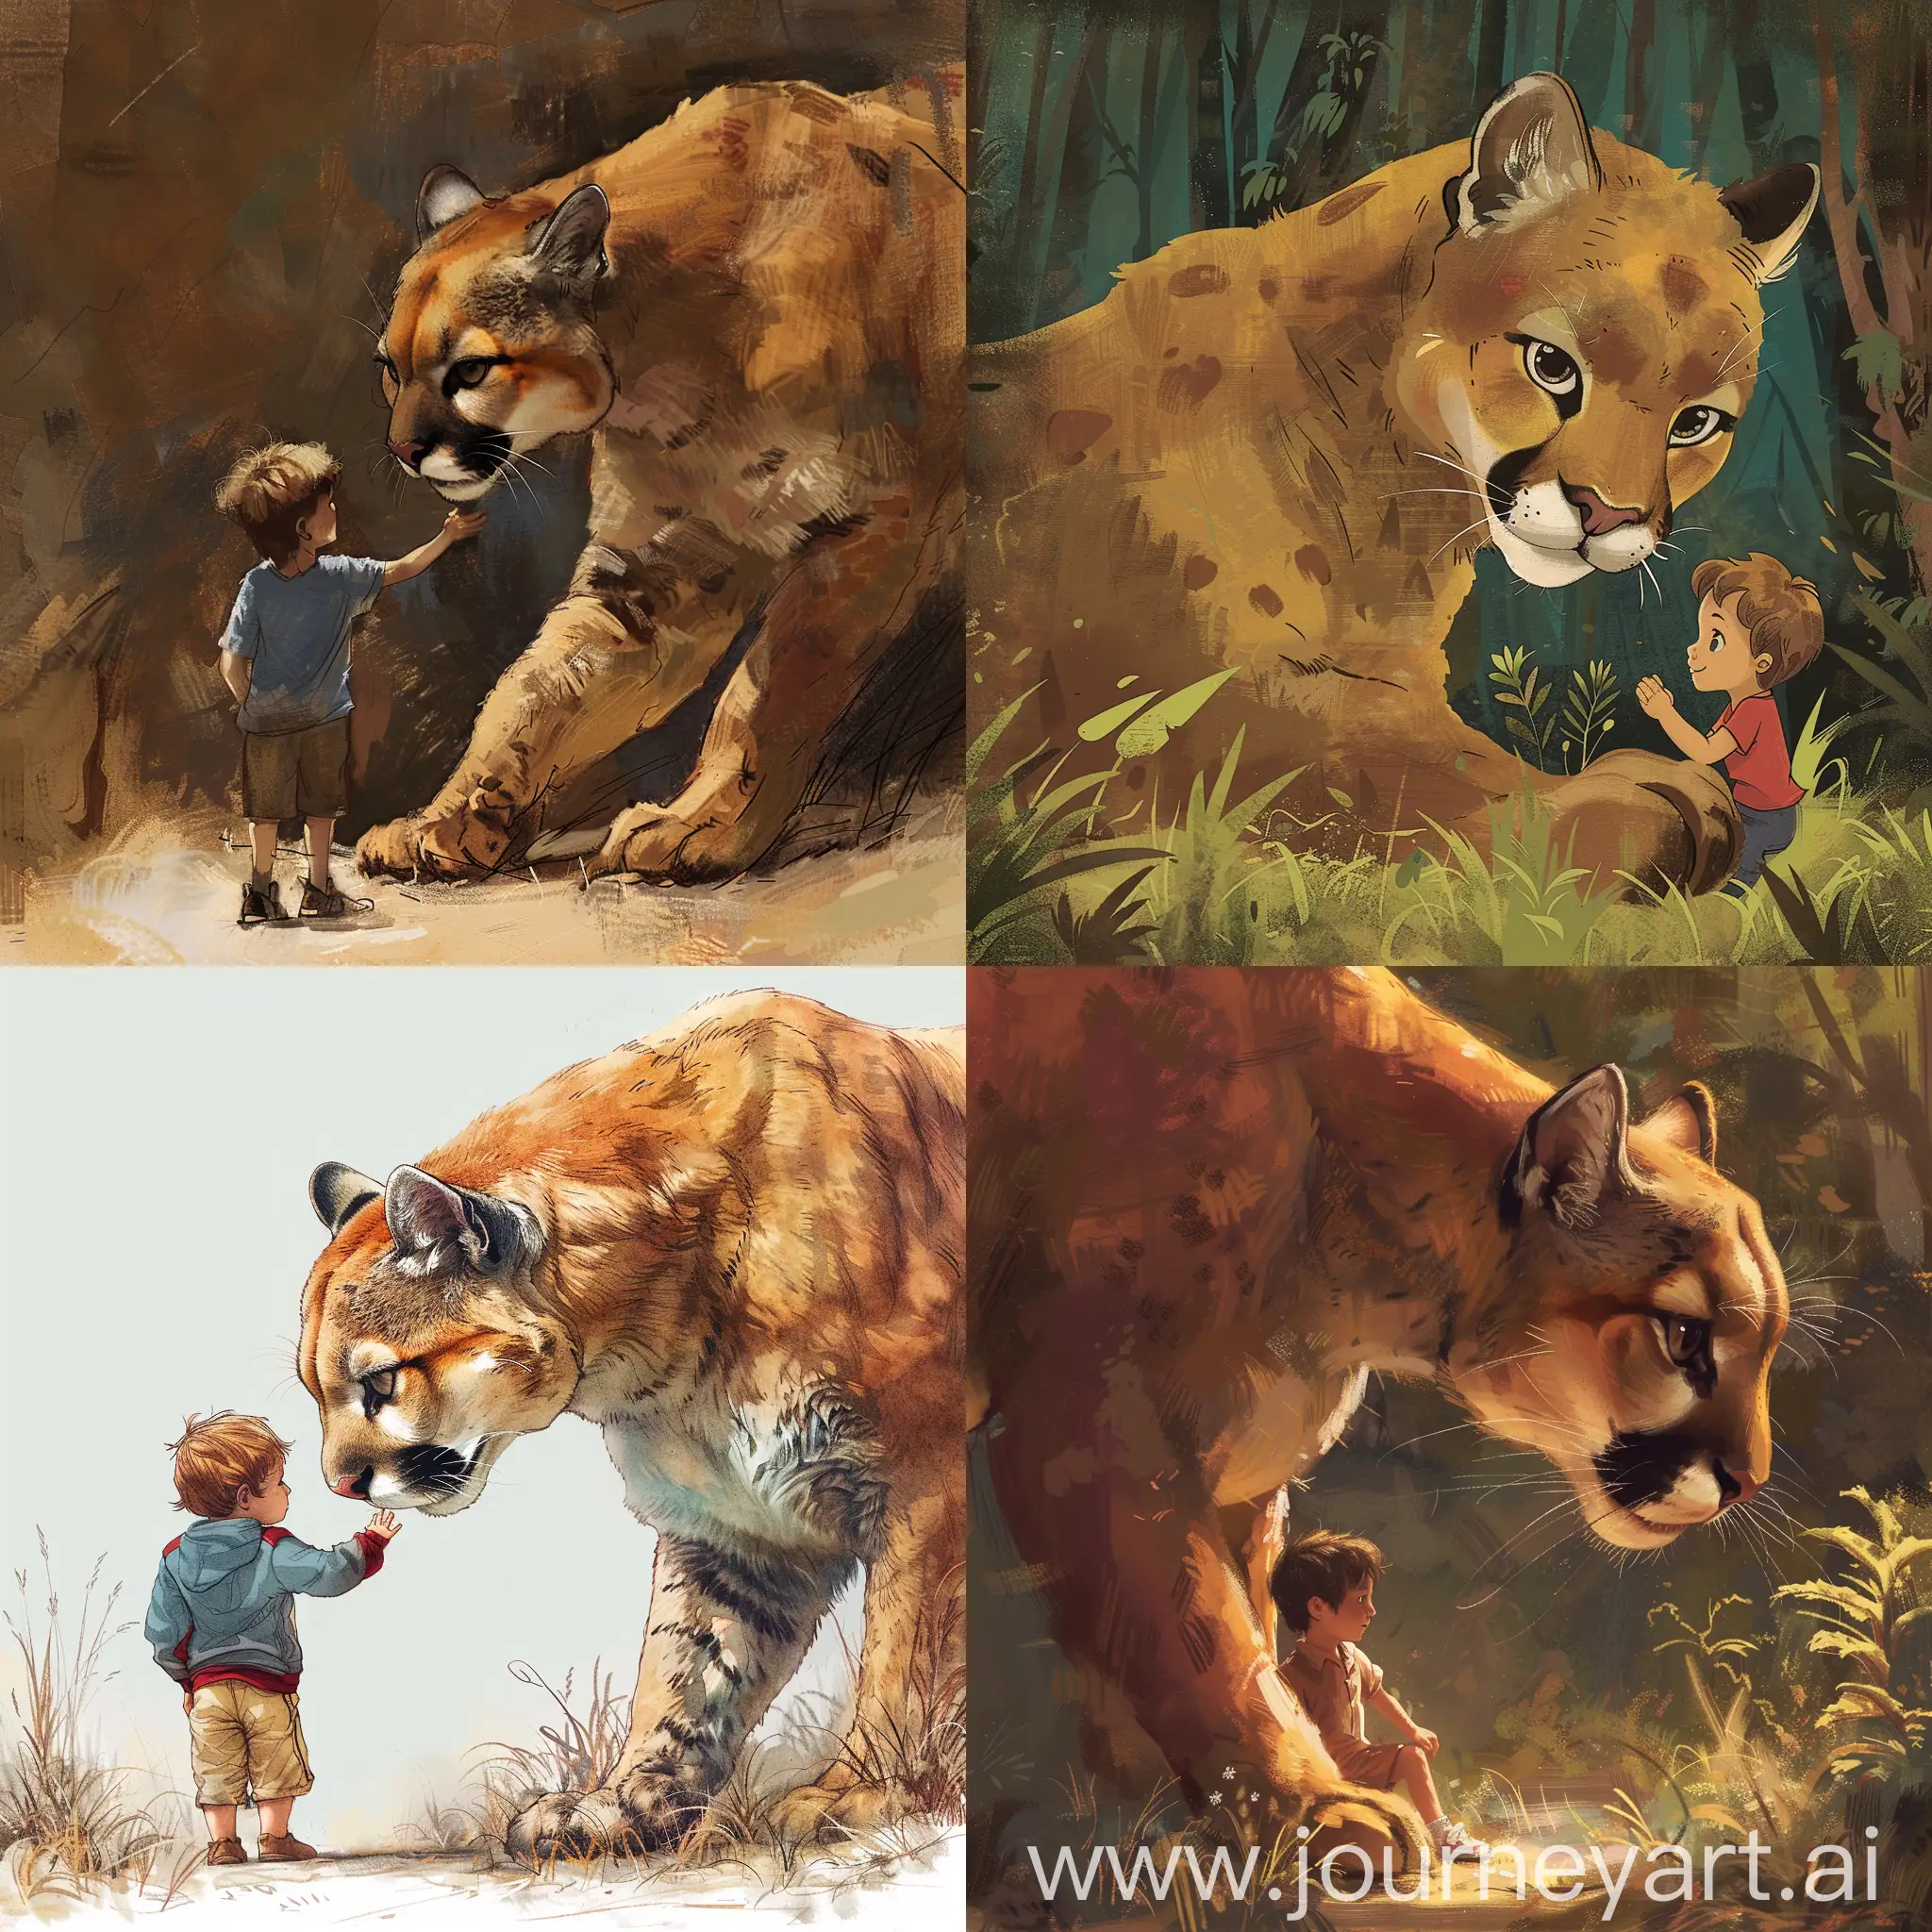 Puma-and-Little-Boy-Unlikely-Friendship-Between-a-Wild-Cat-and-a-Child